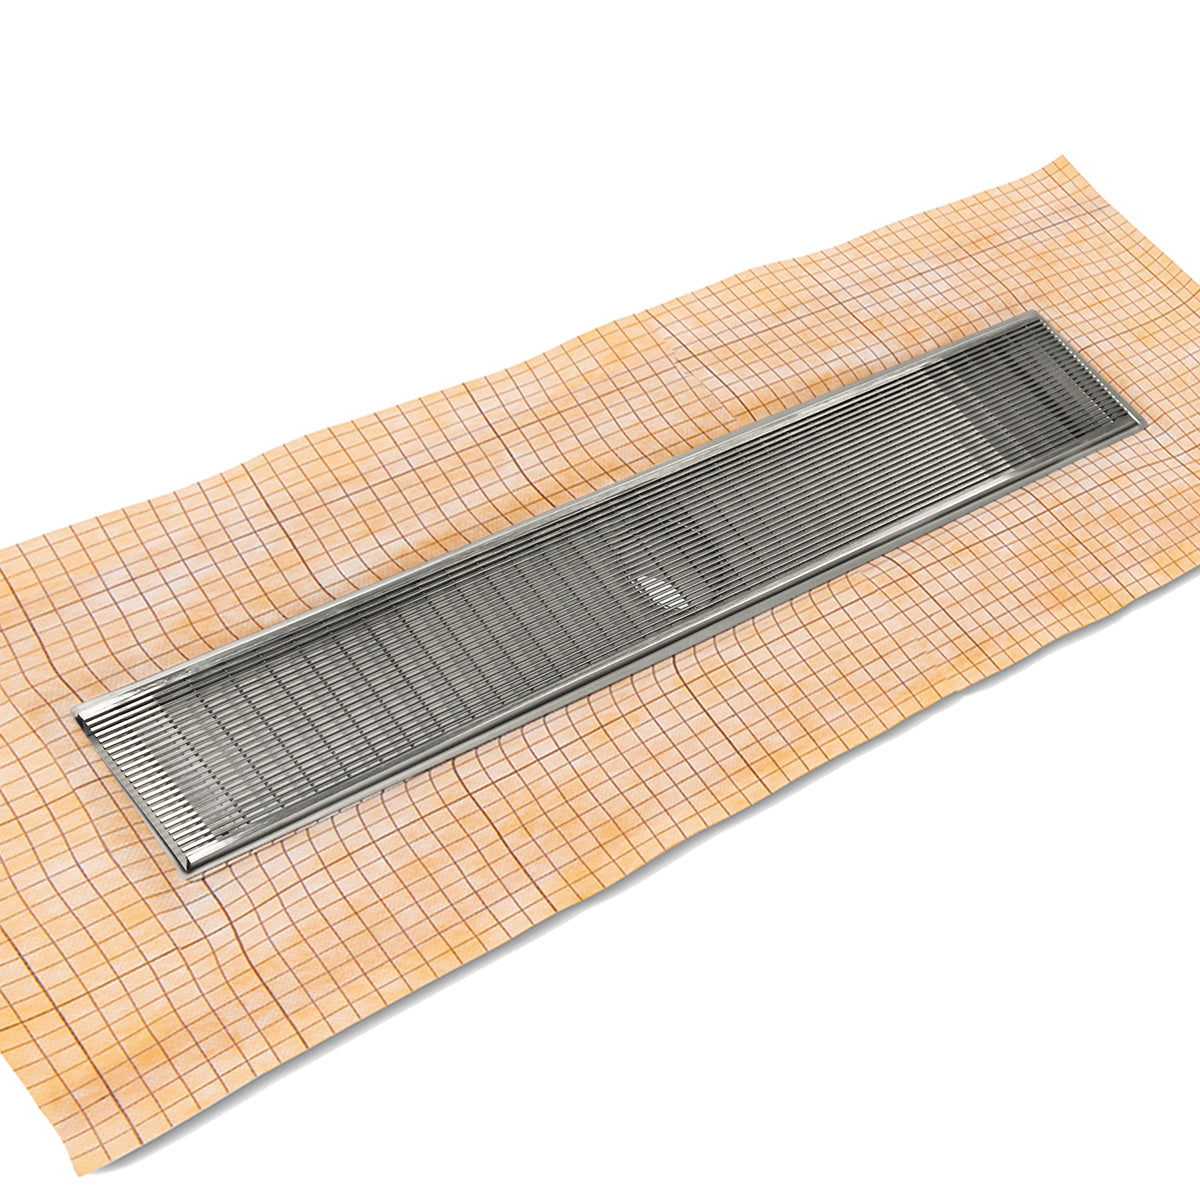 Infinity Drain 48" FCS Series Schluter-Kerdi - Fixed Flange Linear Drain Kit with 5" Wedge Wire Grate